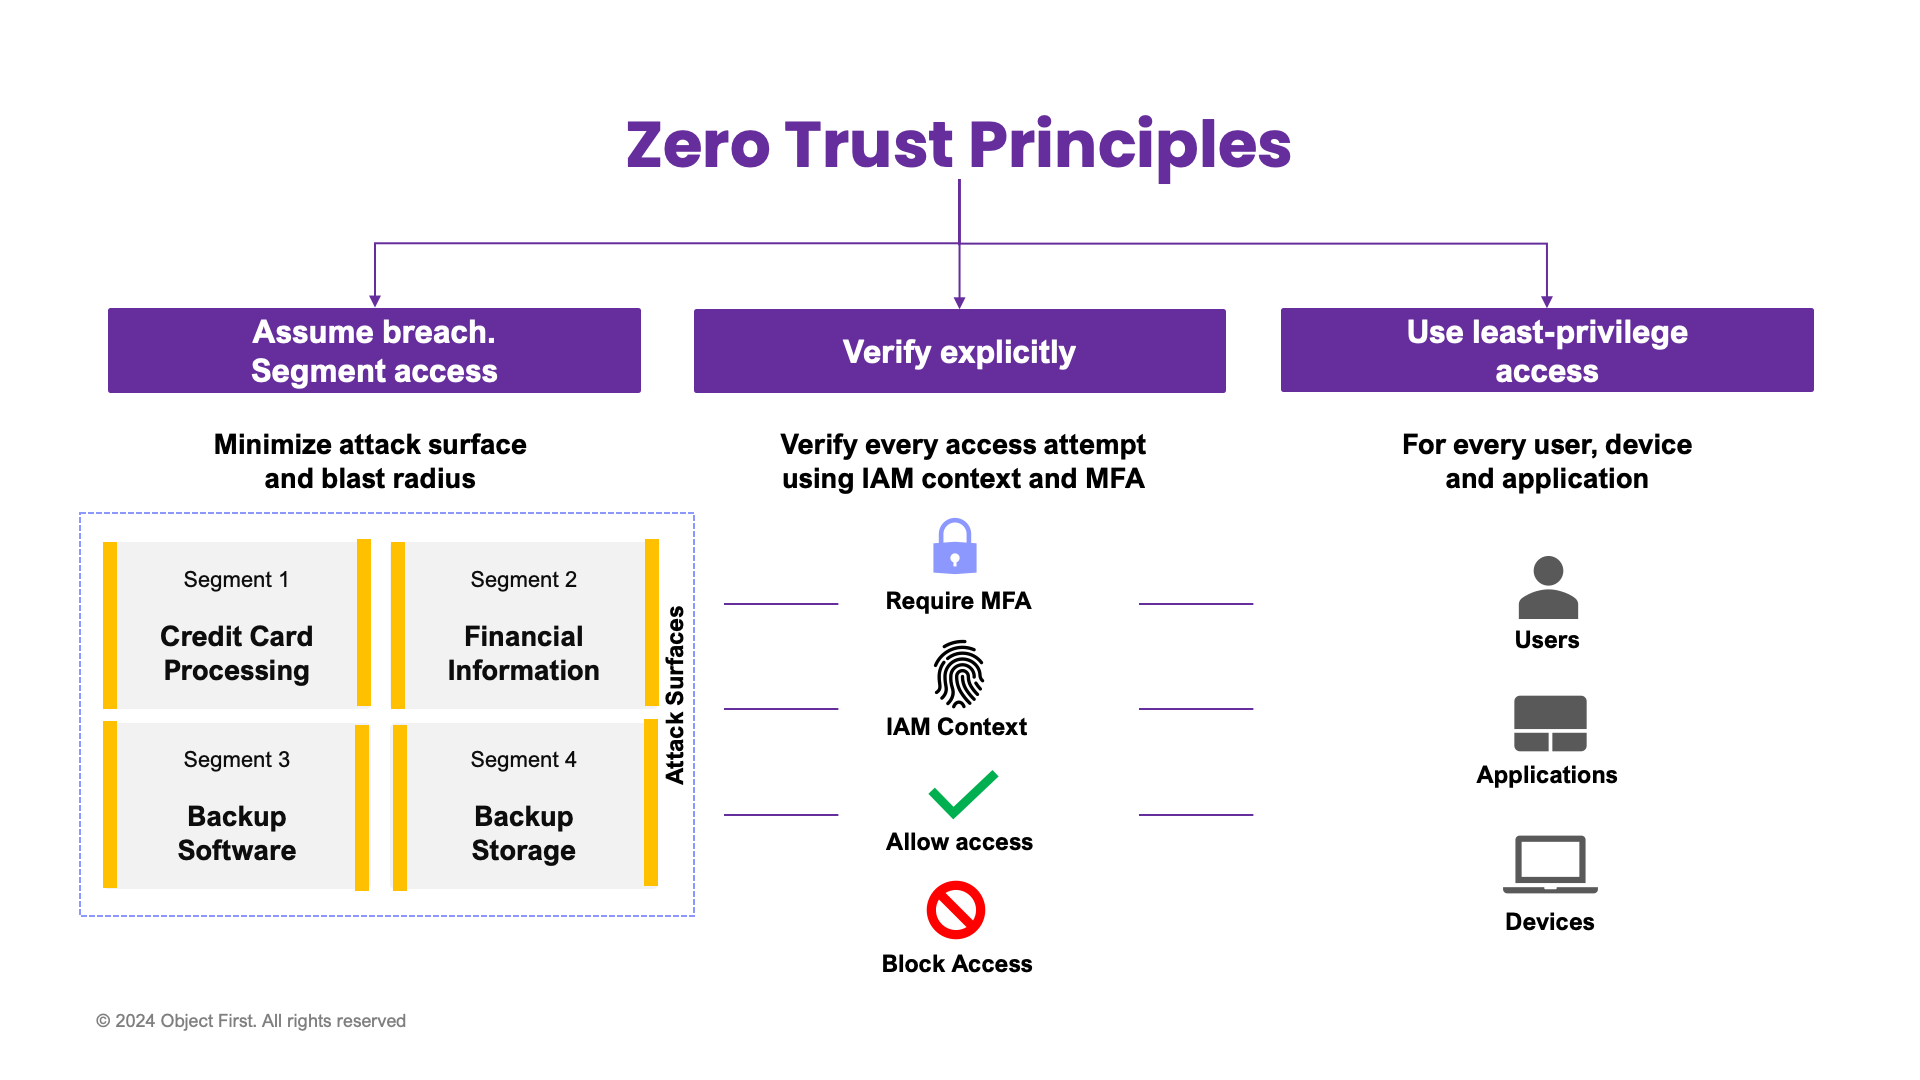 Diagram detailing Object First's Zero Trust Principles with steps: Assume breach with segmented access, Verify explicitly through IAM context and MFA, and Use least-privilege access for every user, device, and application, highlighting the minimization of attack surfaces.